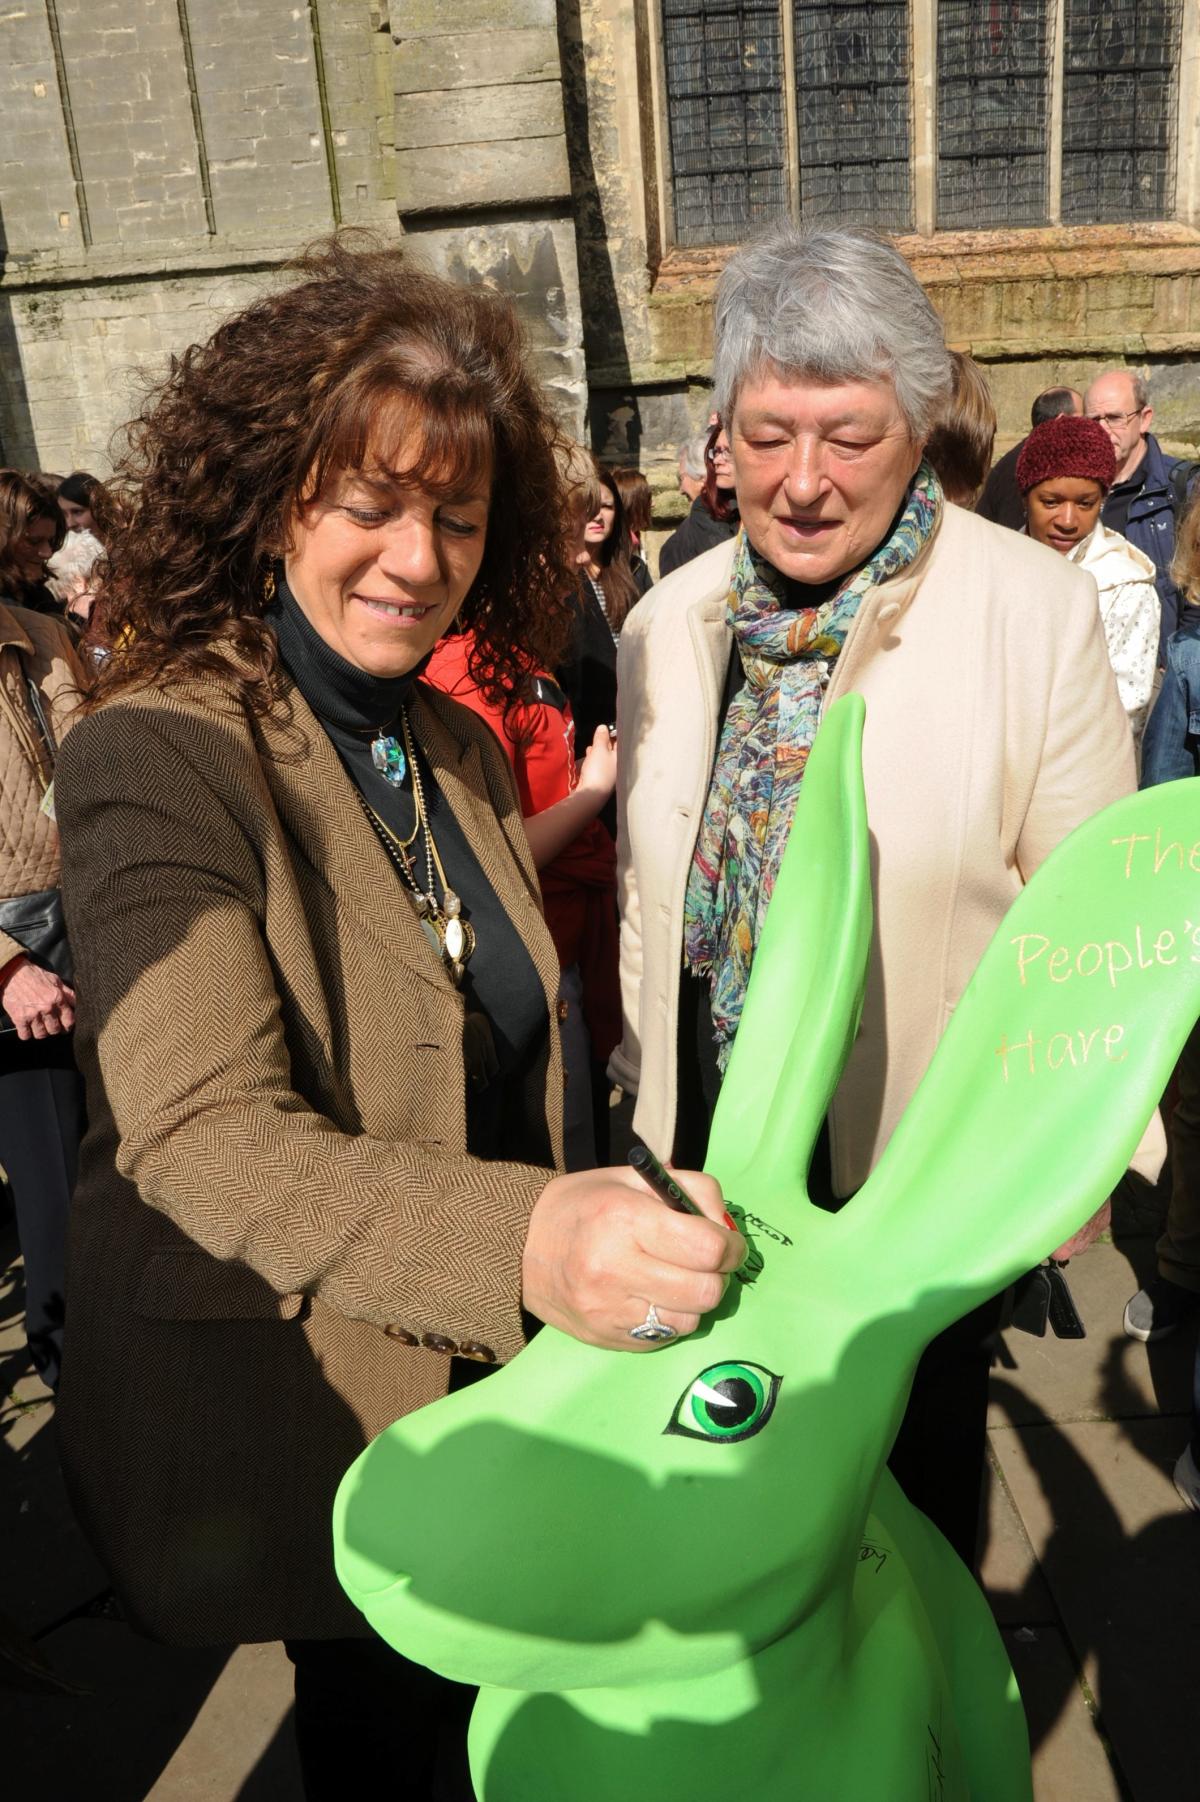 Countess Bathurst and the Lord Lieutenant for Gloucestershire Dame Janet Trotter sign the People's Hare at the launch of the Hare Festival in Cirencester 